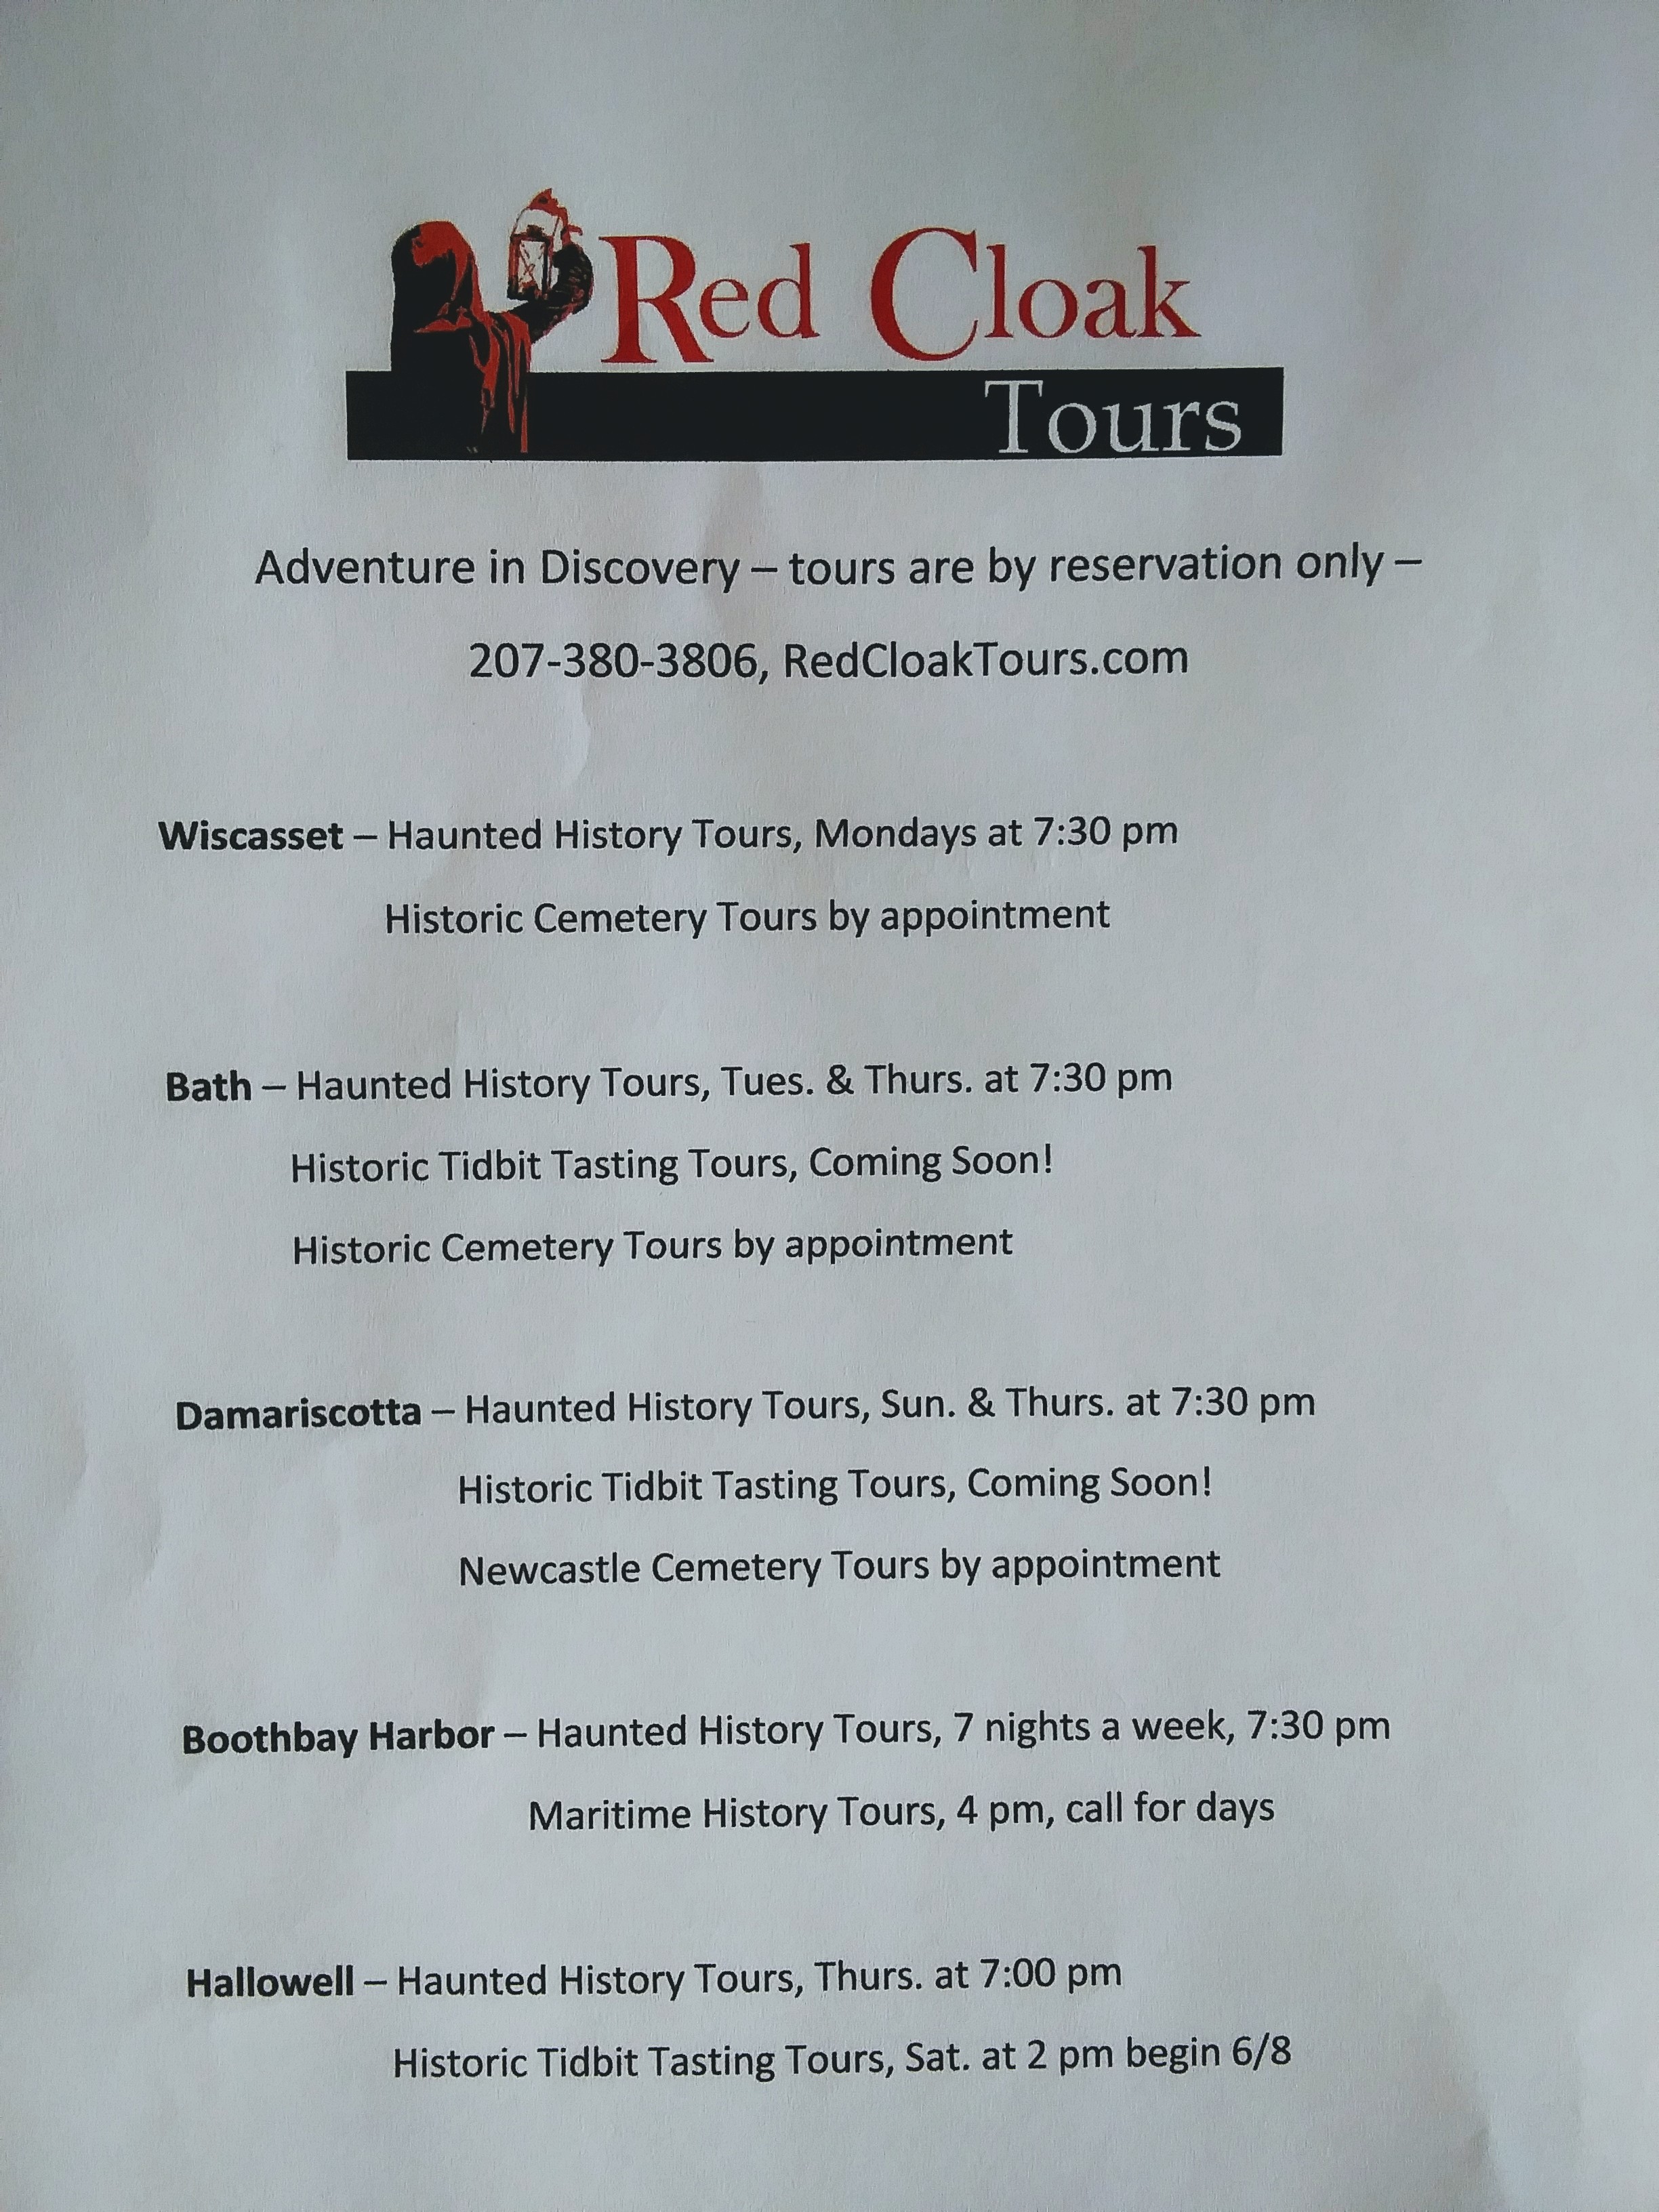 Schedule of Redcloak Tours Walking Tours in Midcoast Maine. 